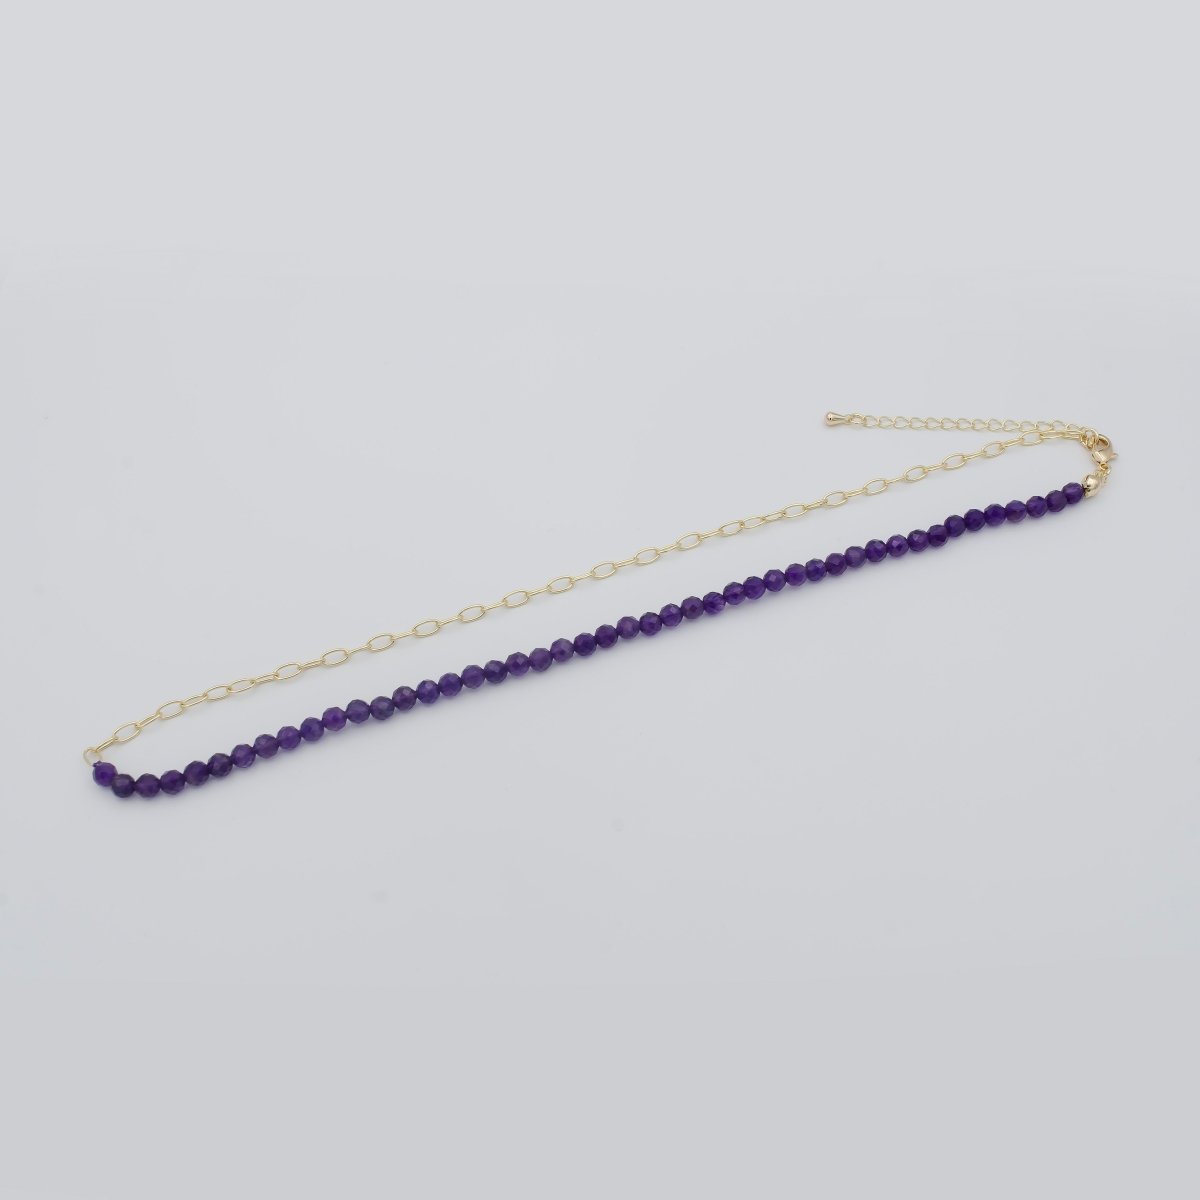 Fused 4mm Purple Amethyst Beads necklace w/ 14k Gold Filled Necklace, Mixed Oval Link Chain Necklace Ready To Wear Two Tone Necklace | WA-021 Clearance Pricing - DLUXCA